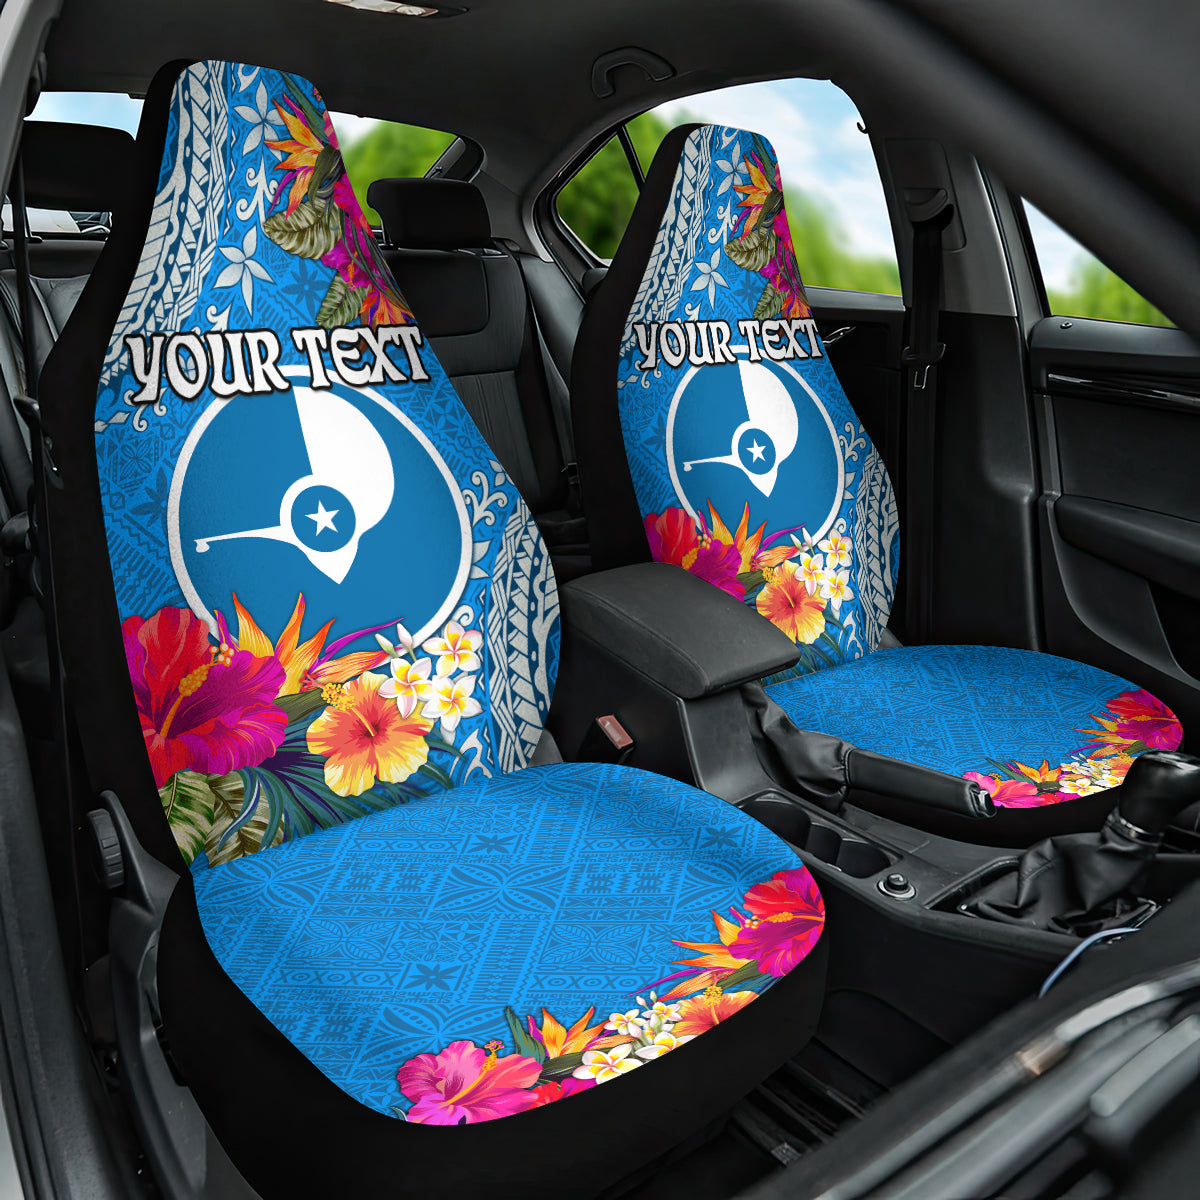 Yap Day Car Seat Cover Tapa Pattern with Hisbiscus